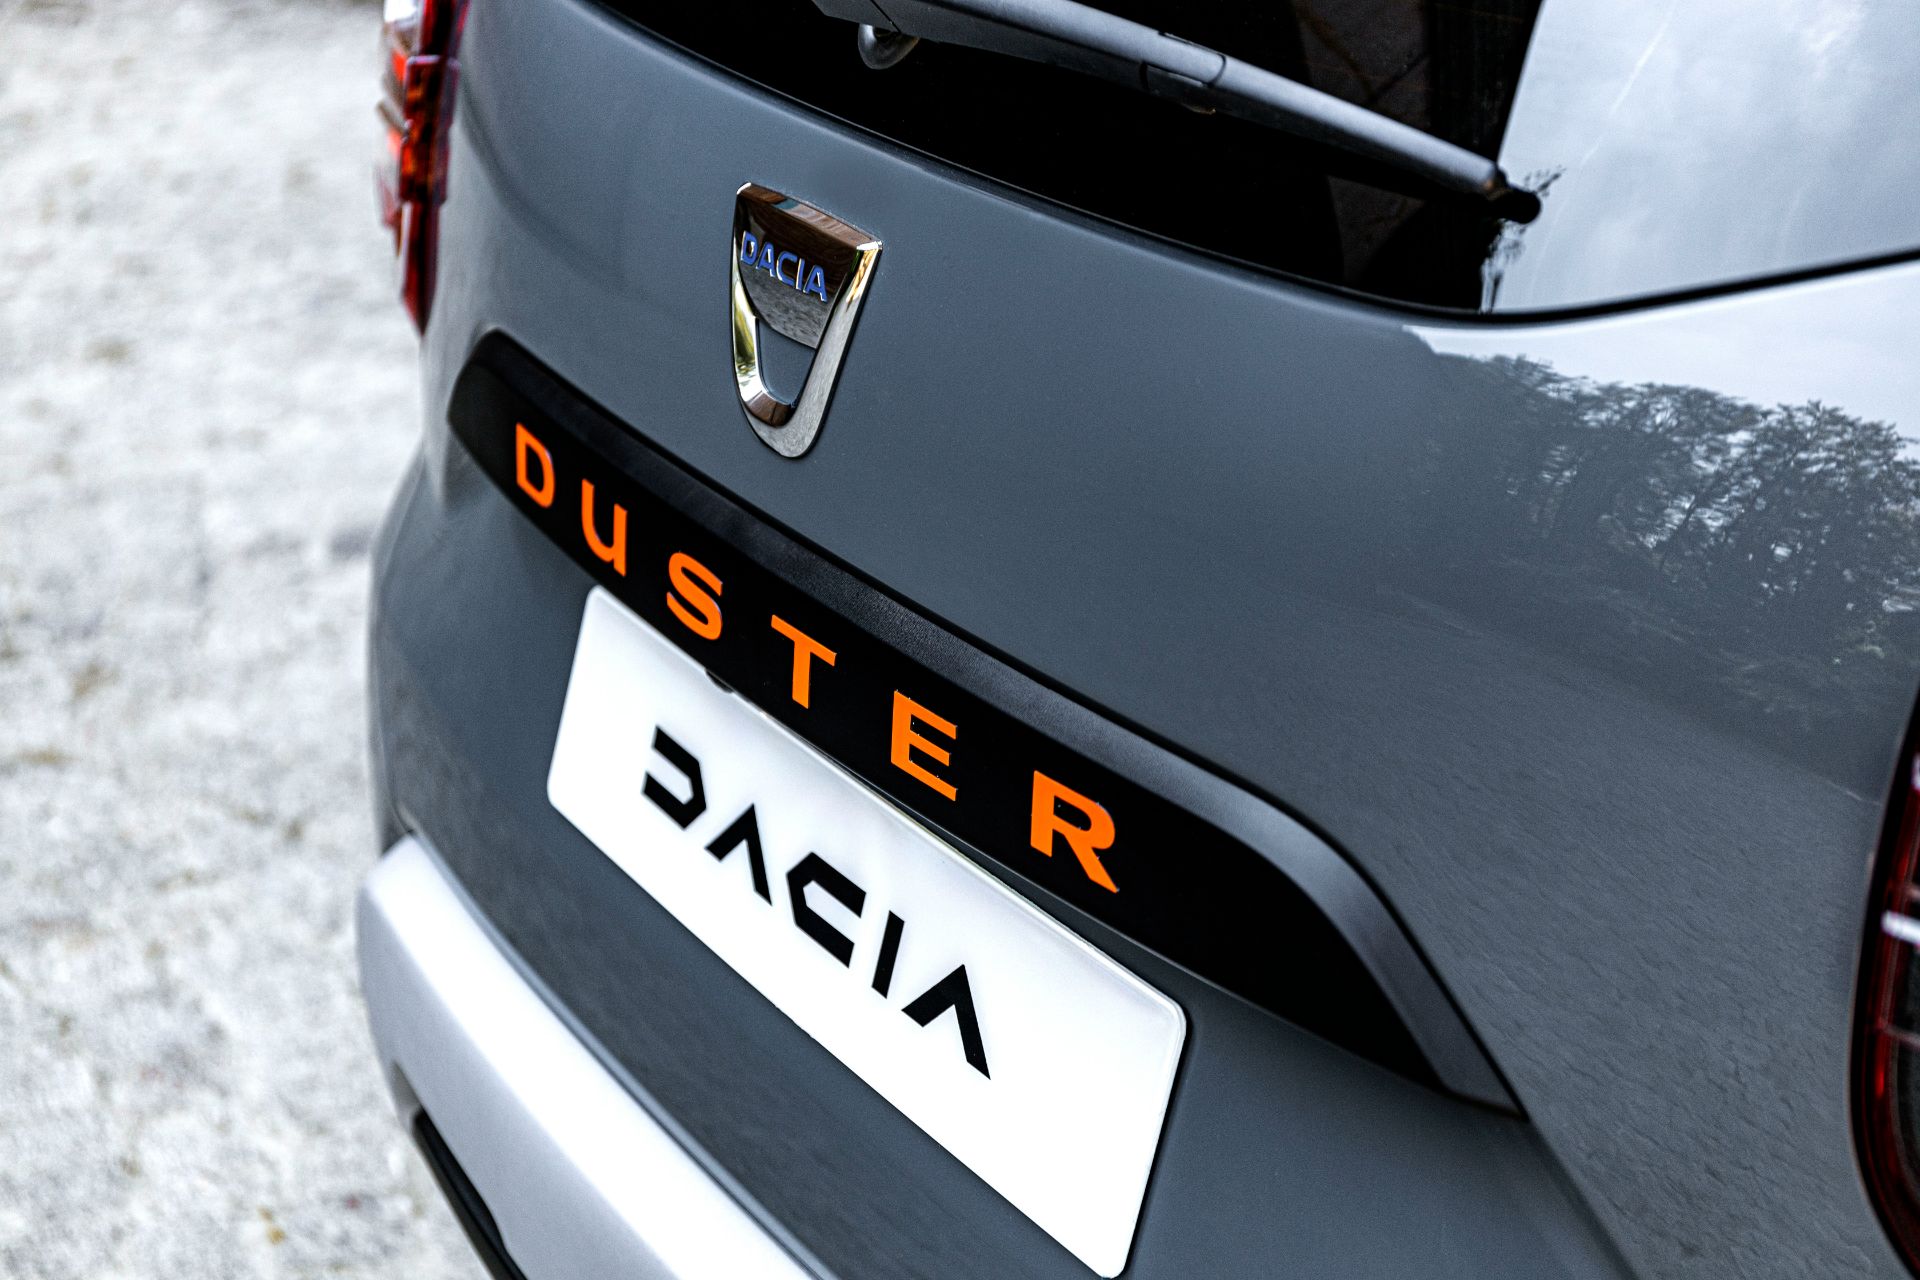 Dacia Duster Extreme Limited Edition resim galerisi (30.08.2021)